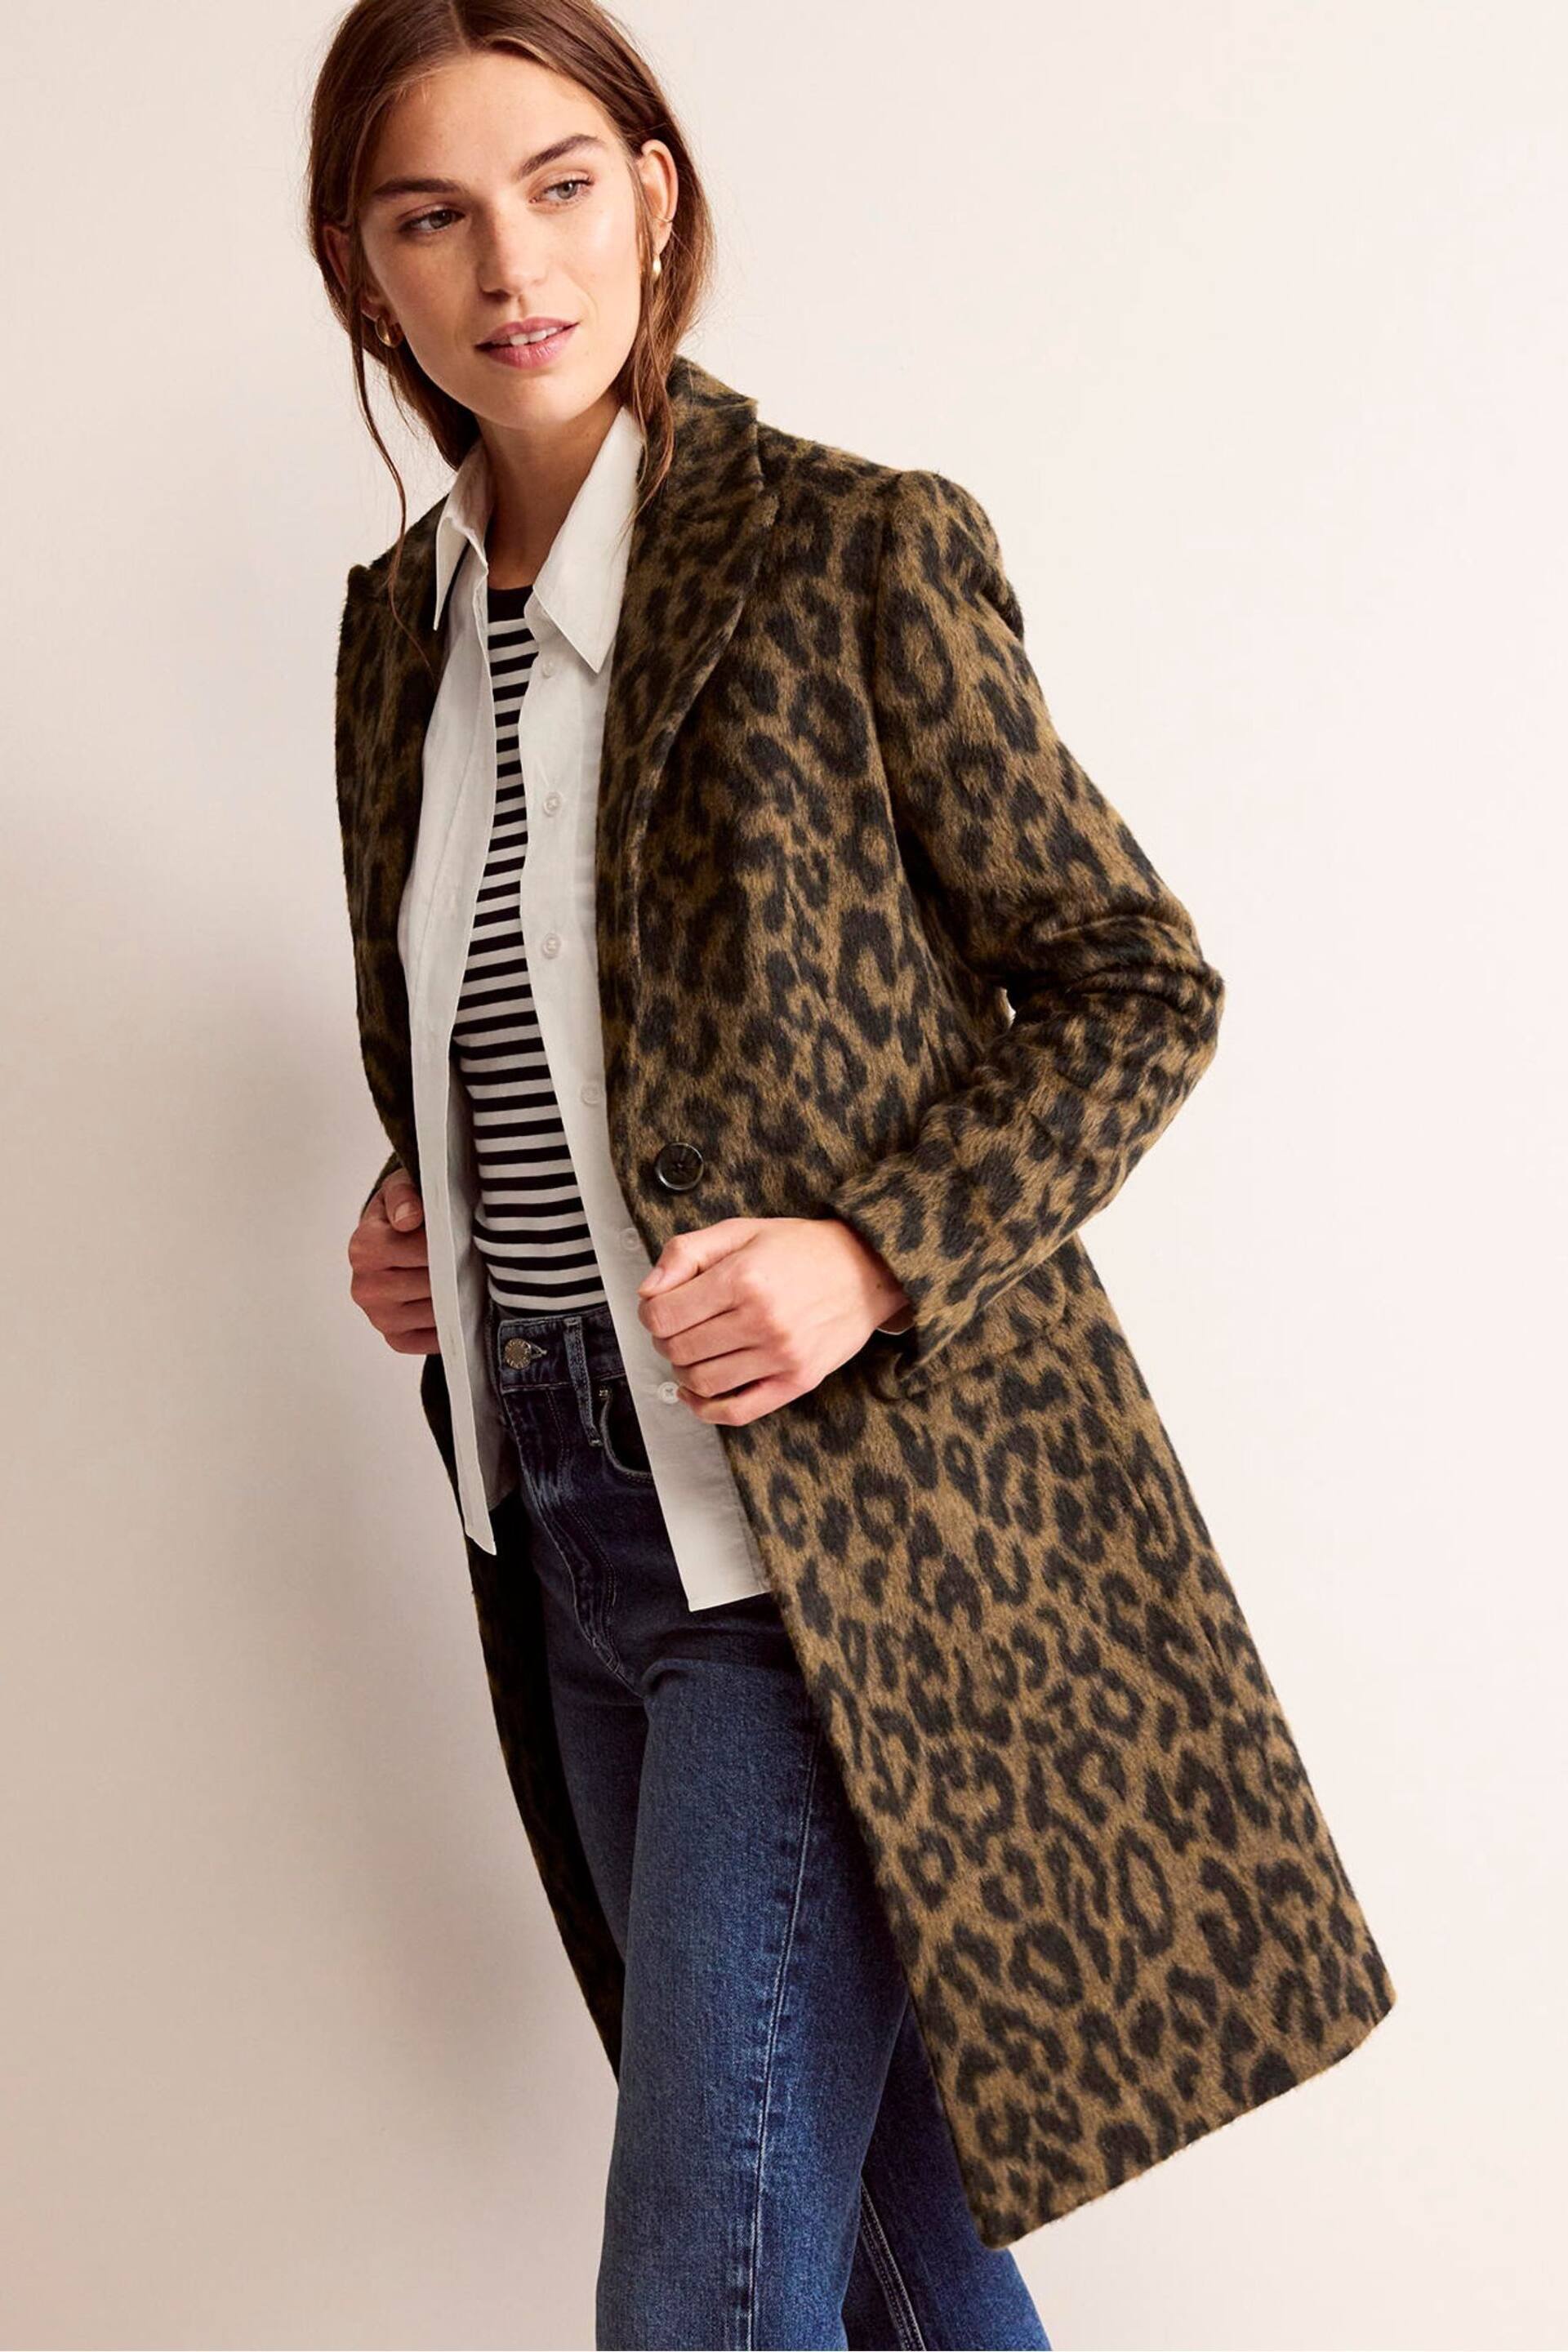 Boden Brown Canterbury Interest Coat - Image 2 of 6